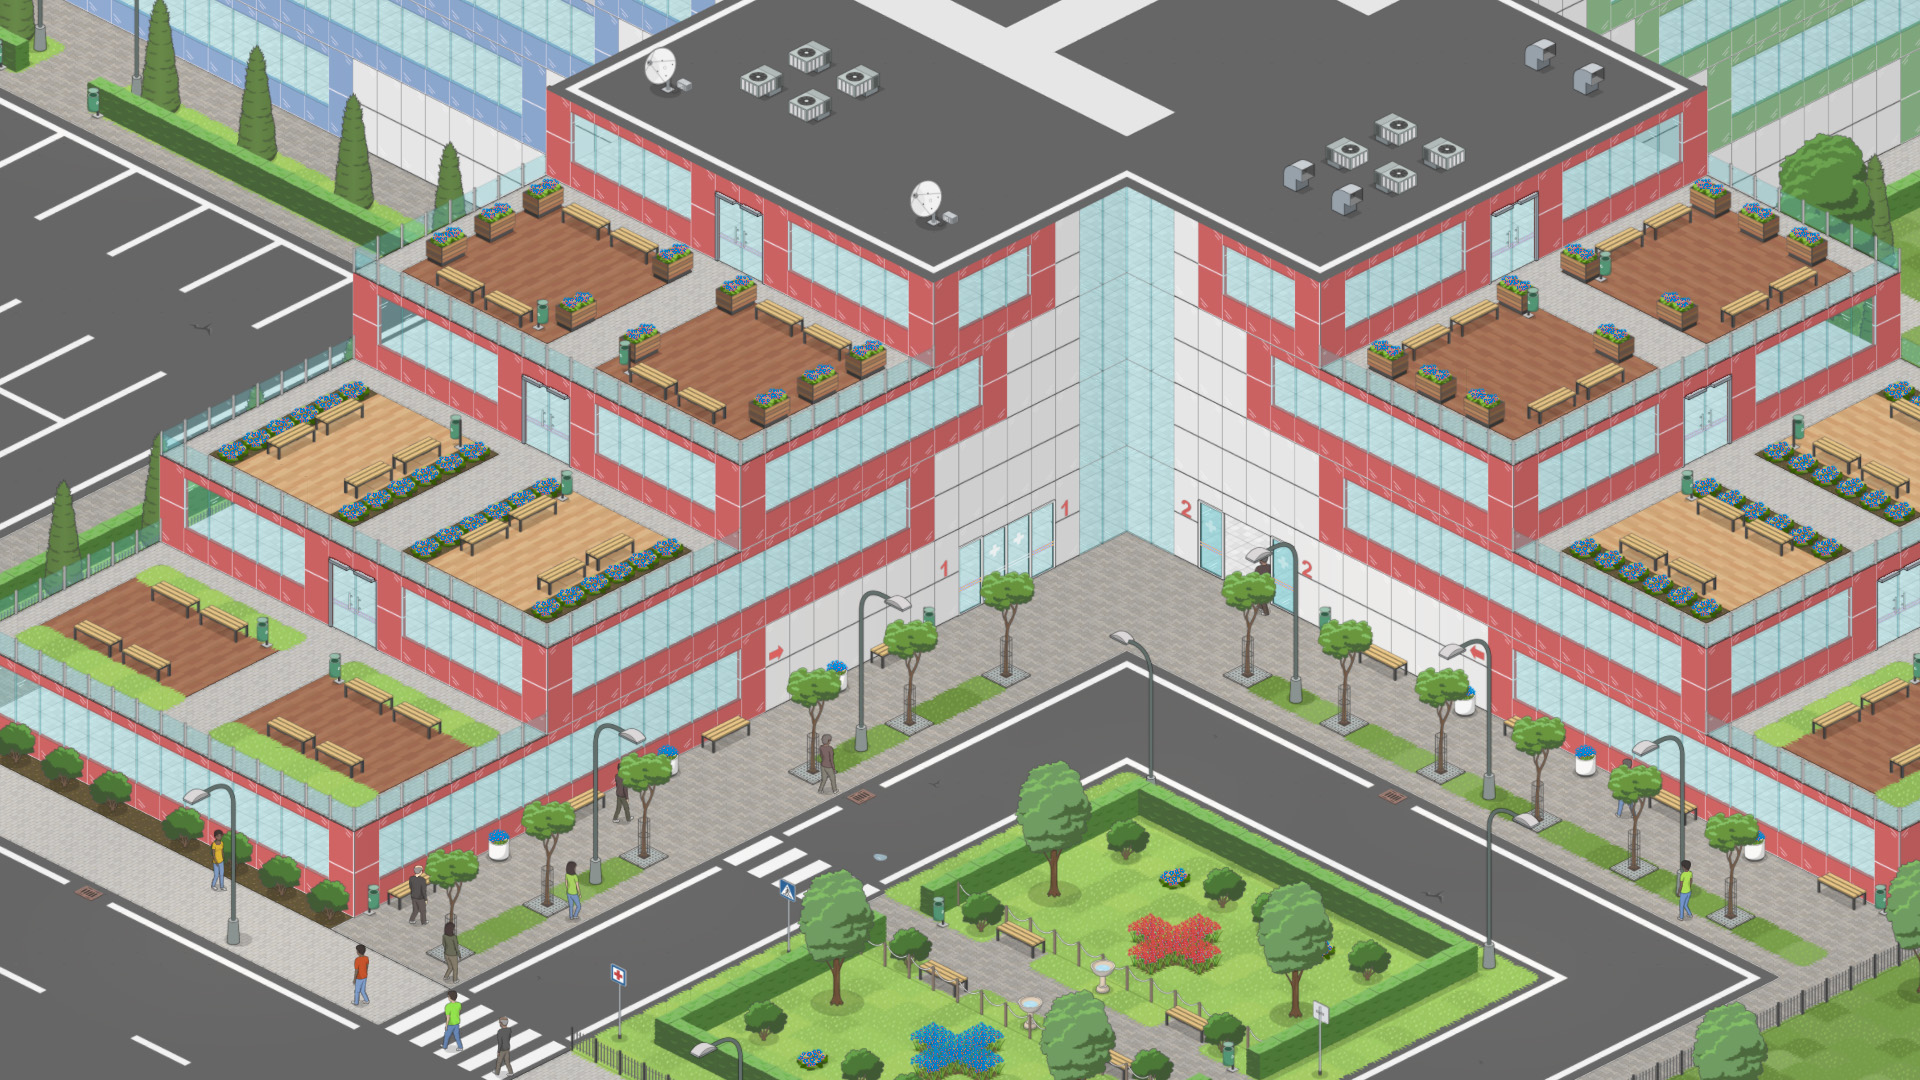 Project Hospital Free Download